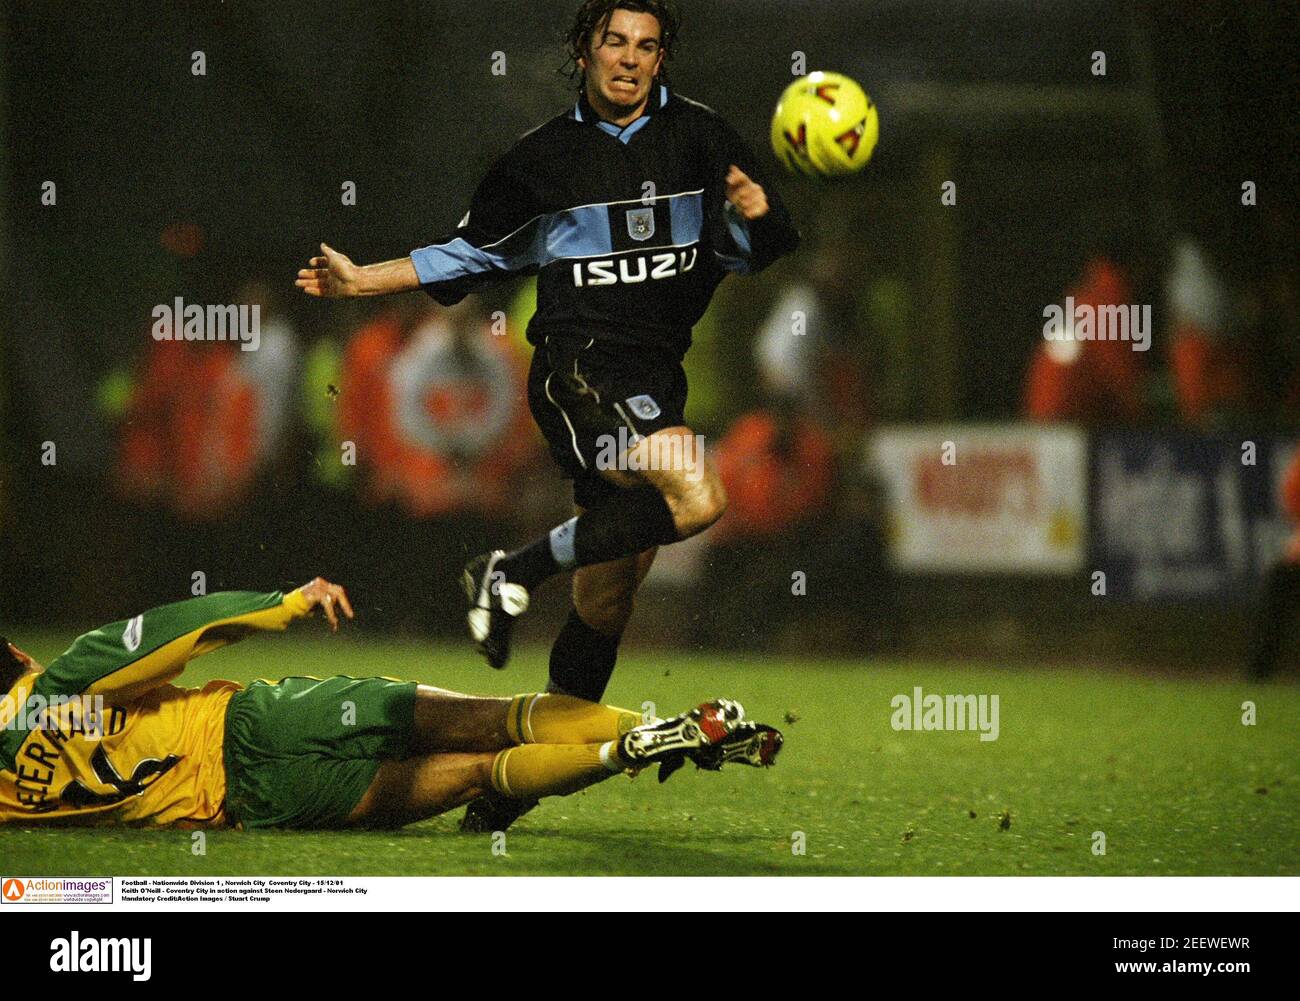 Football - Nationwide Division 1 , Norwich City Coventry City - 15/12/01  Keith O'Neill - Coventry City in action against Steen Nedergaard - Norwich  City Mandatory Credit:Action Images / Stuart Crump Stock Photo - Alamy